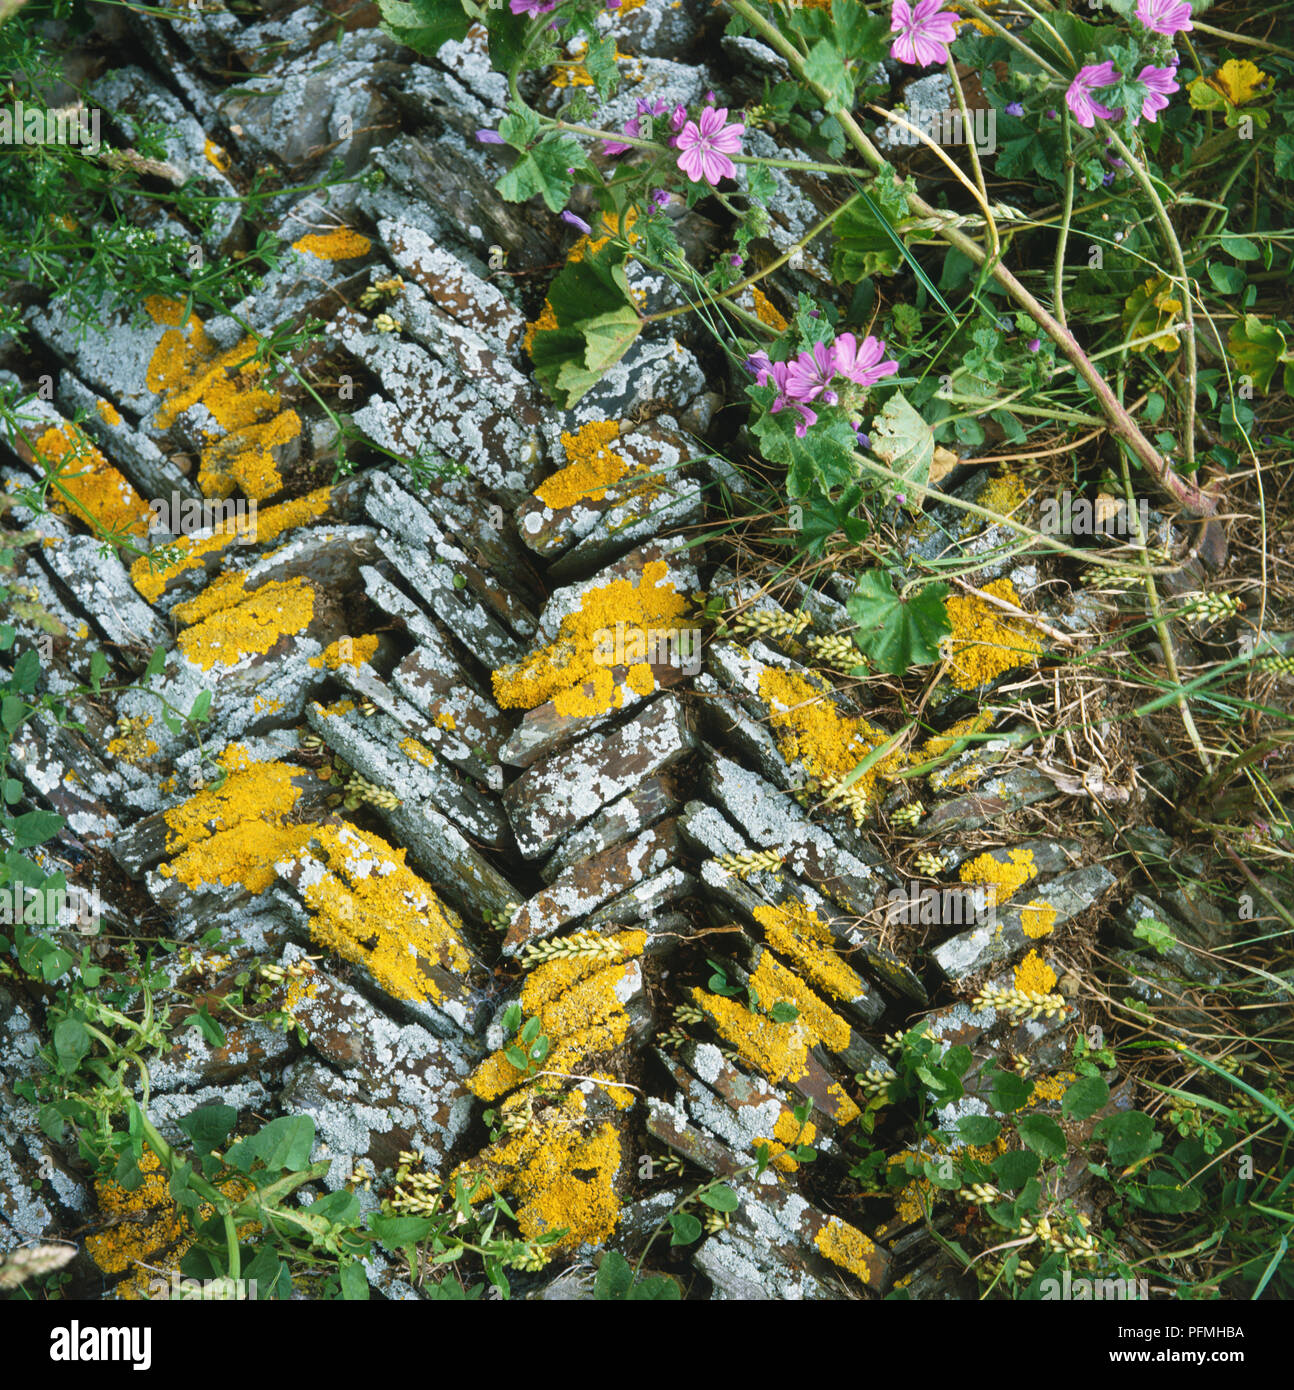 Lichen and flowers growing against stone wall. Stock Photo